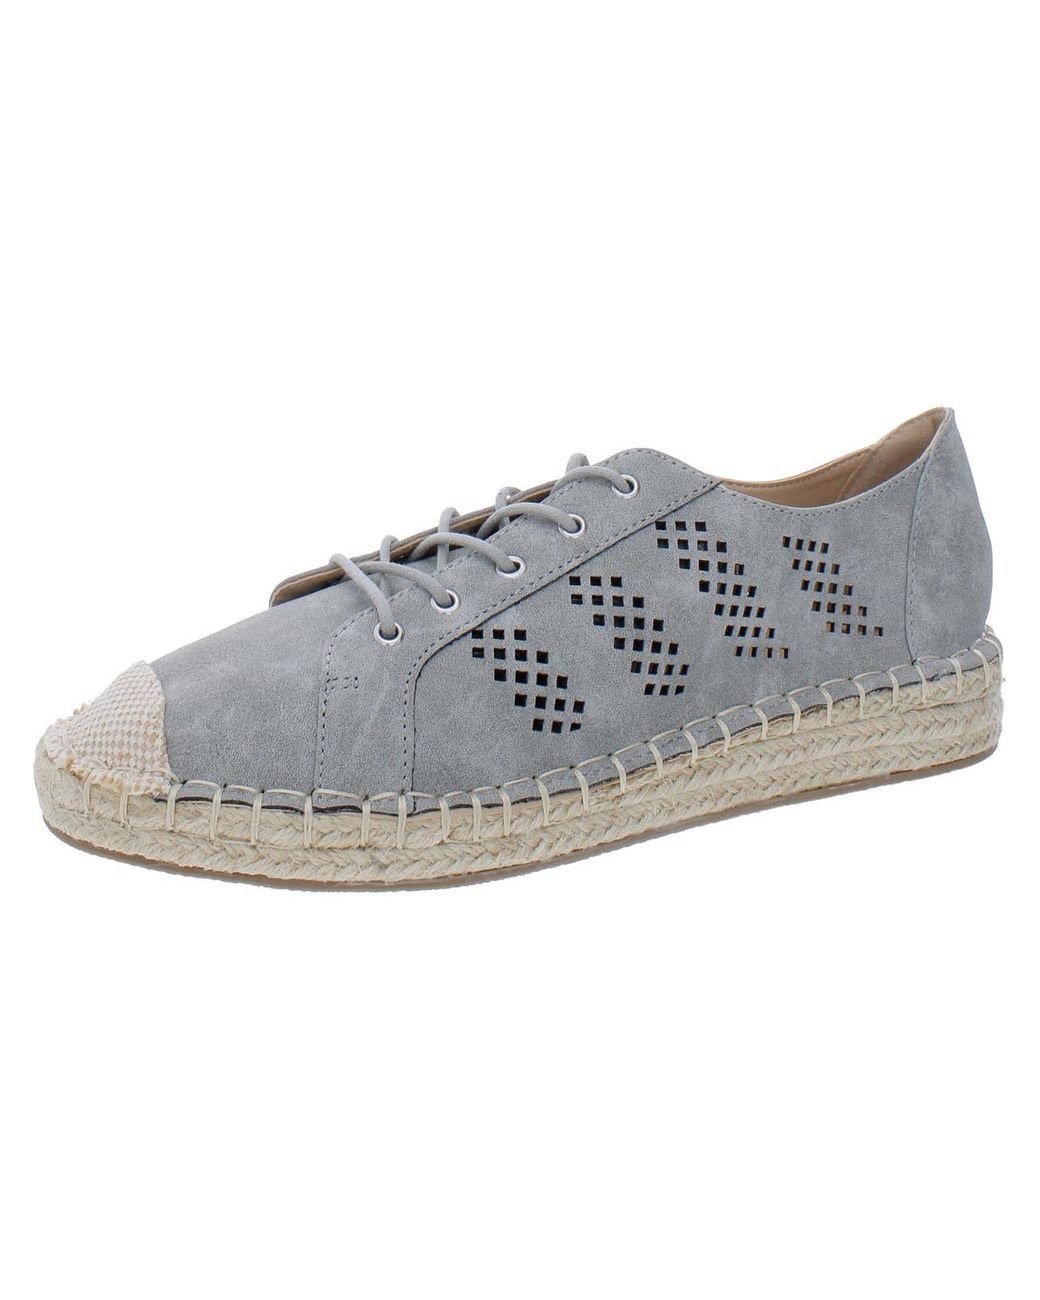 Journee Collection Razili Faux Leather Perforated Espadrilles in Gray ...